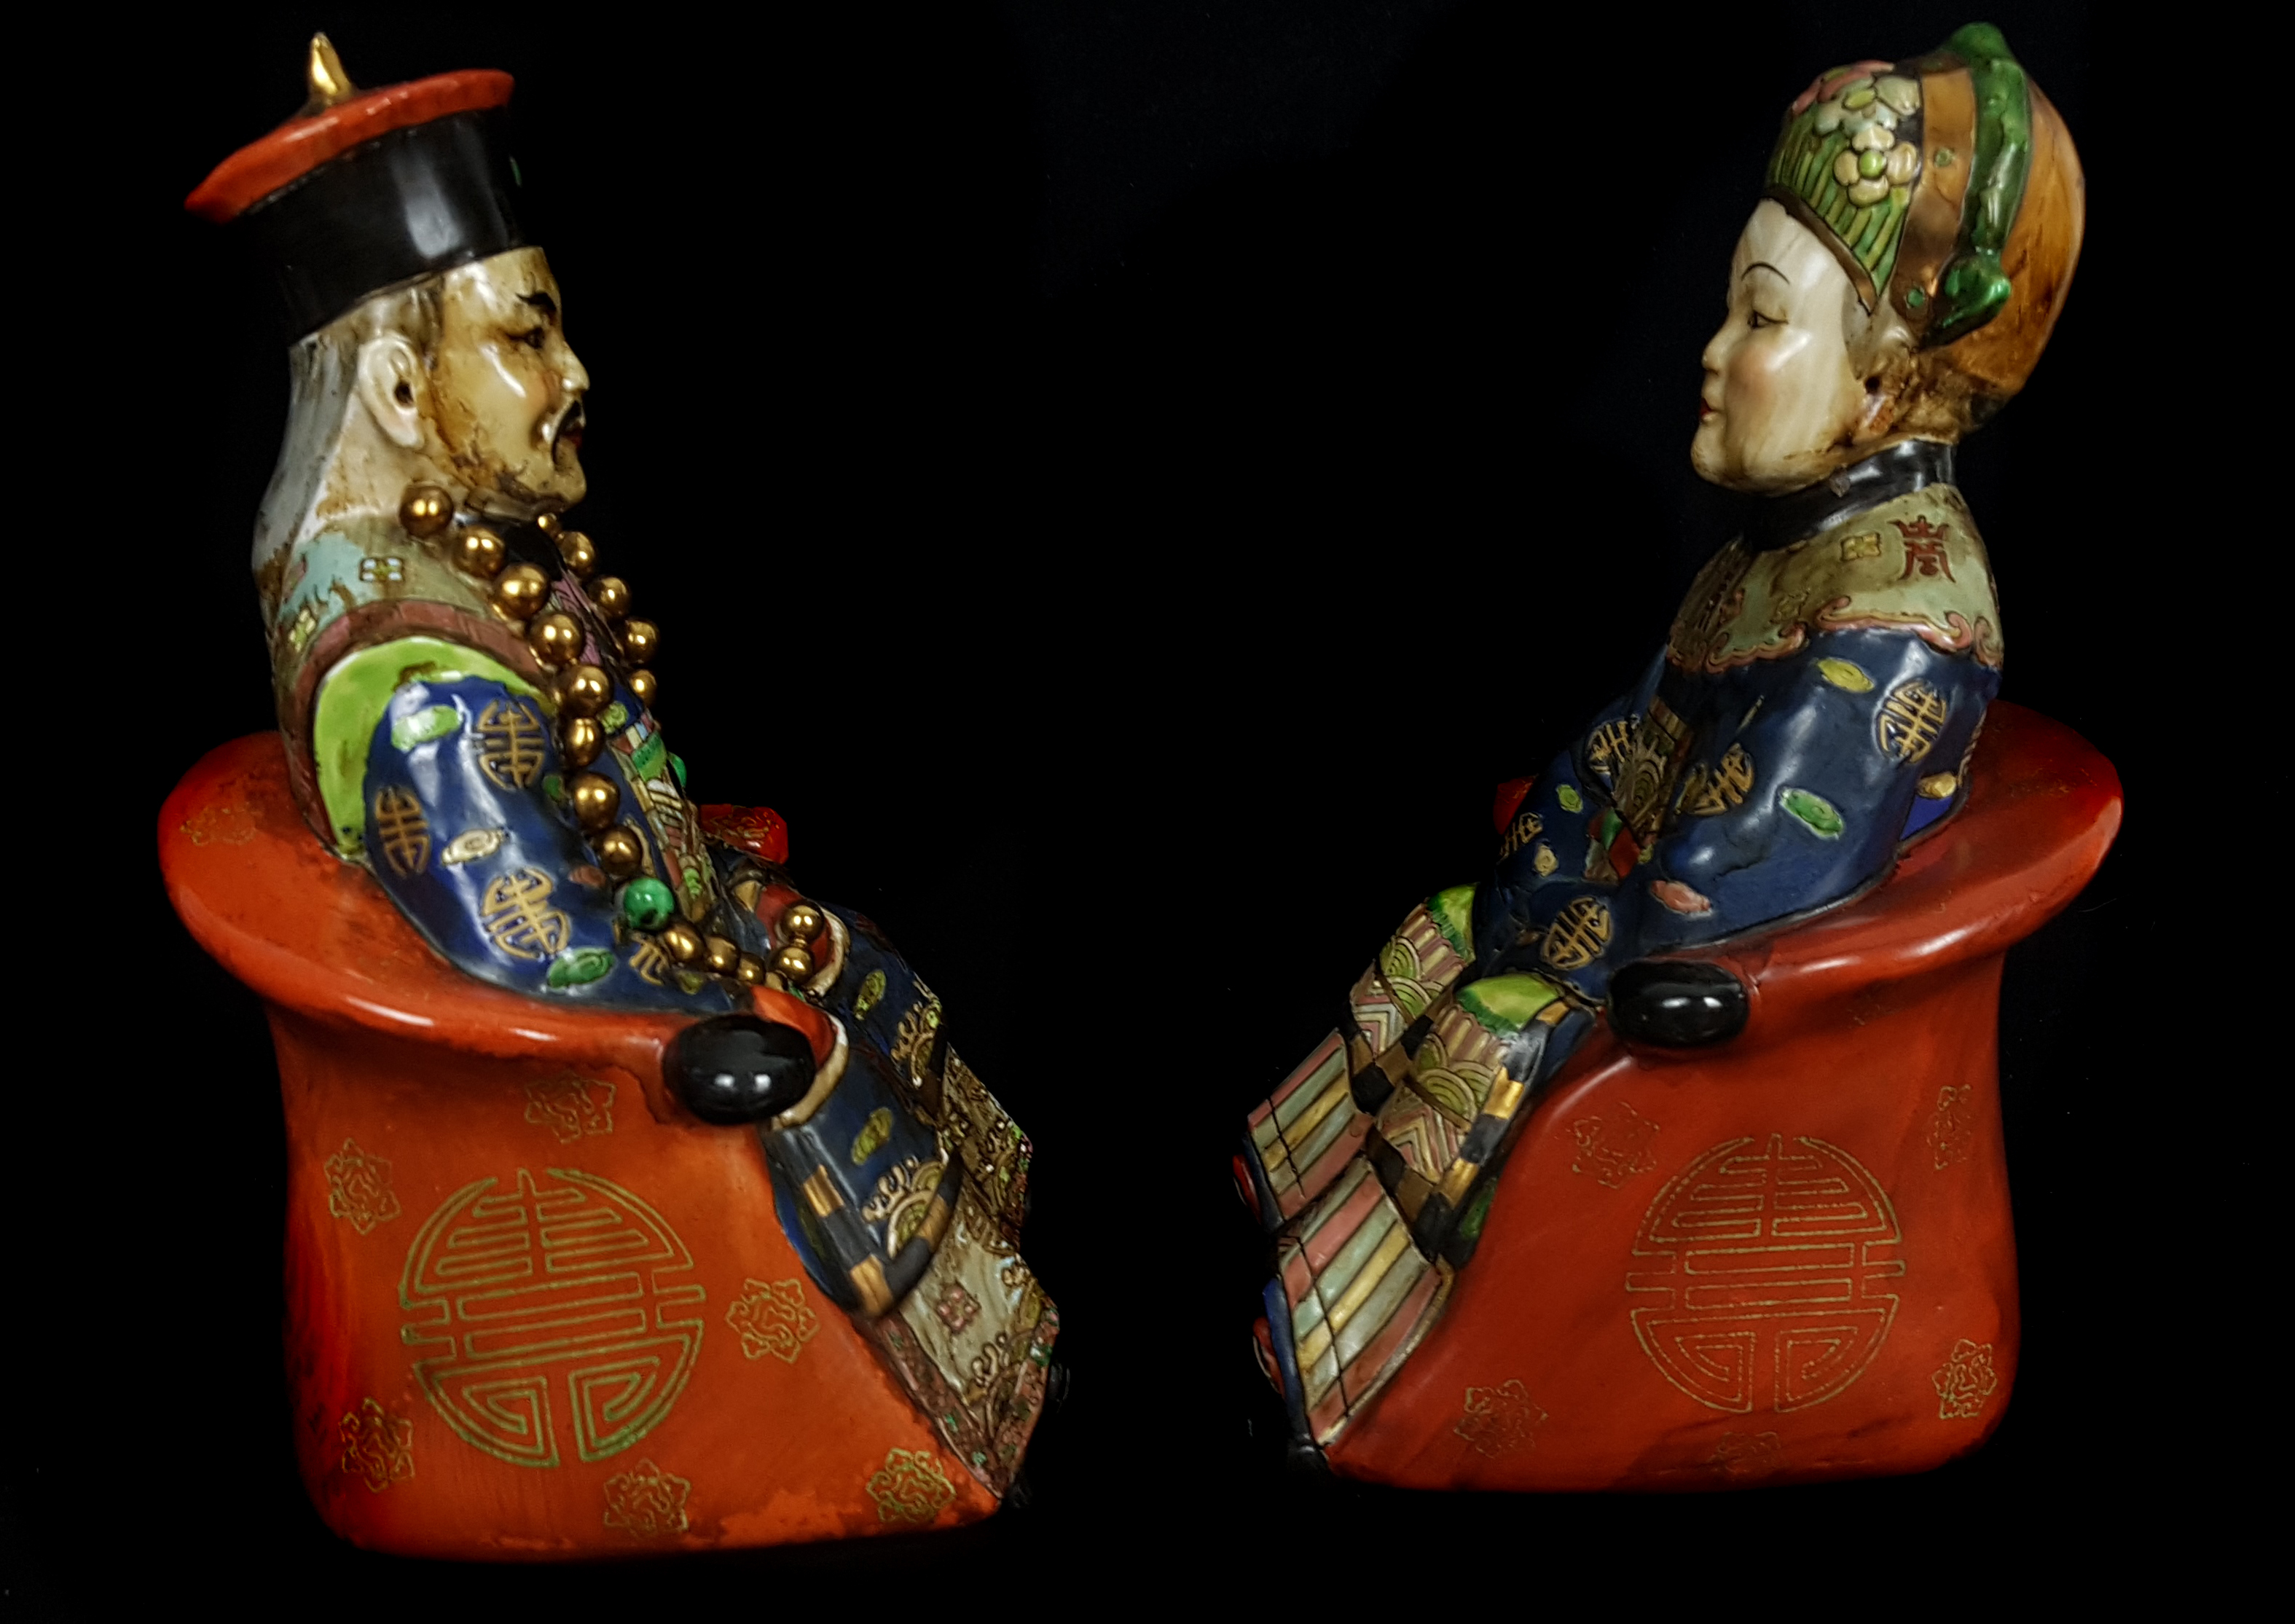 Two Chinese pottery ancestor figures, seated on thrones, polychrome decorated, 29cm high (2) - Image 2 of 3